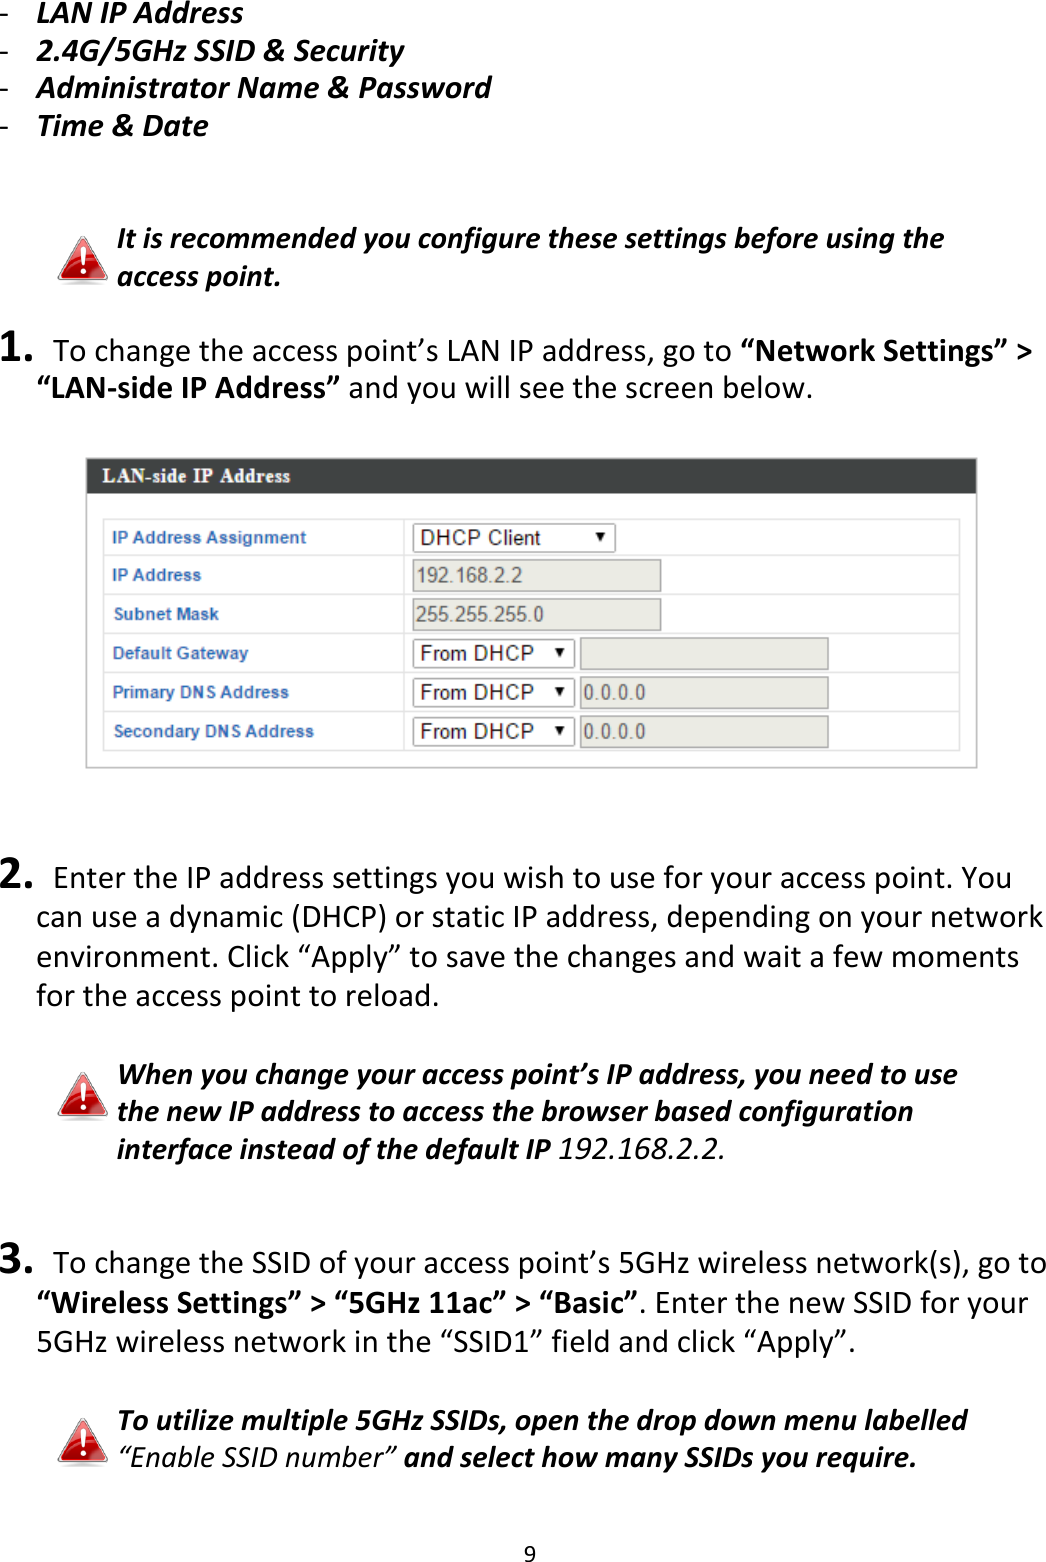 9  - LAN IP Address - 2.4G/5GHz SSID &amp; Security - Administrator Name &amp; Password - Time &amp; Date   It is recommended you configure these settings before using the access point.  1.  To change the access point’s LAN IP address, go to “Network Settings” &gt; “LAN-side IP Address” and you will see the screen below.     2.   Enter the IP address settings you wish to use for your access point. You can use a dynamic (DHCP) or static IP address, depending on your network environment. Click “Apply” to save the changes and wait a few moments for the access point to reload.  When you change your access point’s IP address, you need to use the new IP address to access the browser based configuration interface instead of the default IP 192.168.2.2.   3.  To change the SSID of your access point’s 5GHz wireless network(s), go to “Wireless Settings” &gt; “5GHz 11ac” &gt; “Basic”. Enter the new SSID for your 5GHz wireless network in the “SSID1” field and click “Apply”.  To utilize multiple 5GHz SSIDs, open the drop down menu labelled “Enable SSID number” and select how many SSIDs you require. 